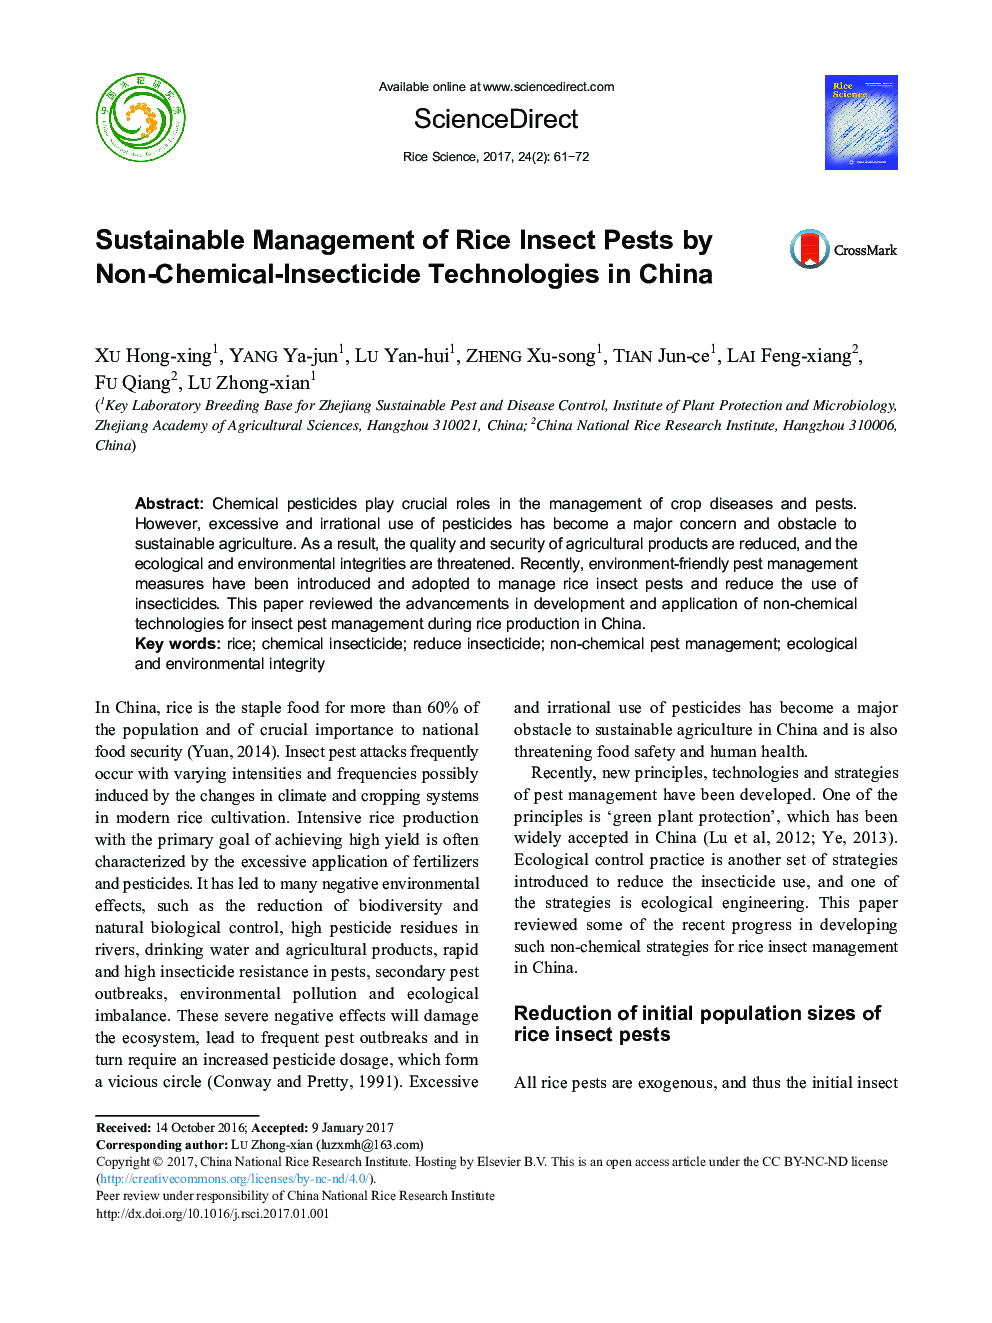 Sustainable Management of Rice Insect Pests by Non-Chemical-Insecticide Technologies in China